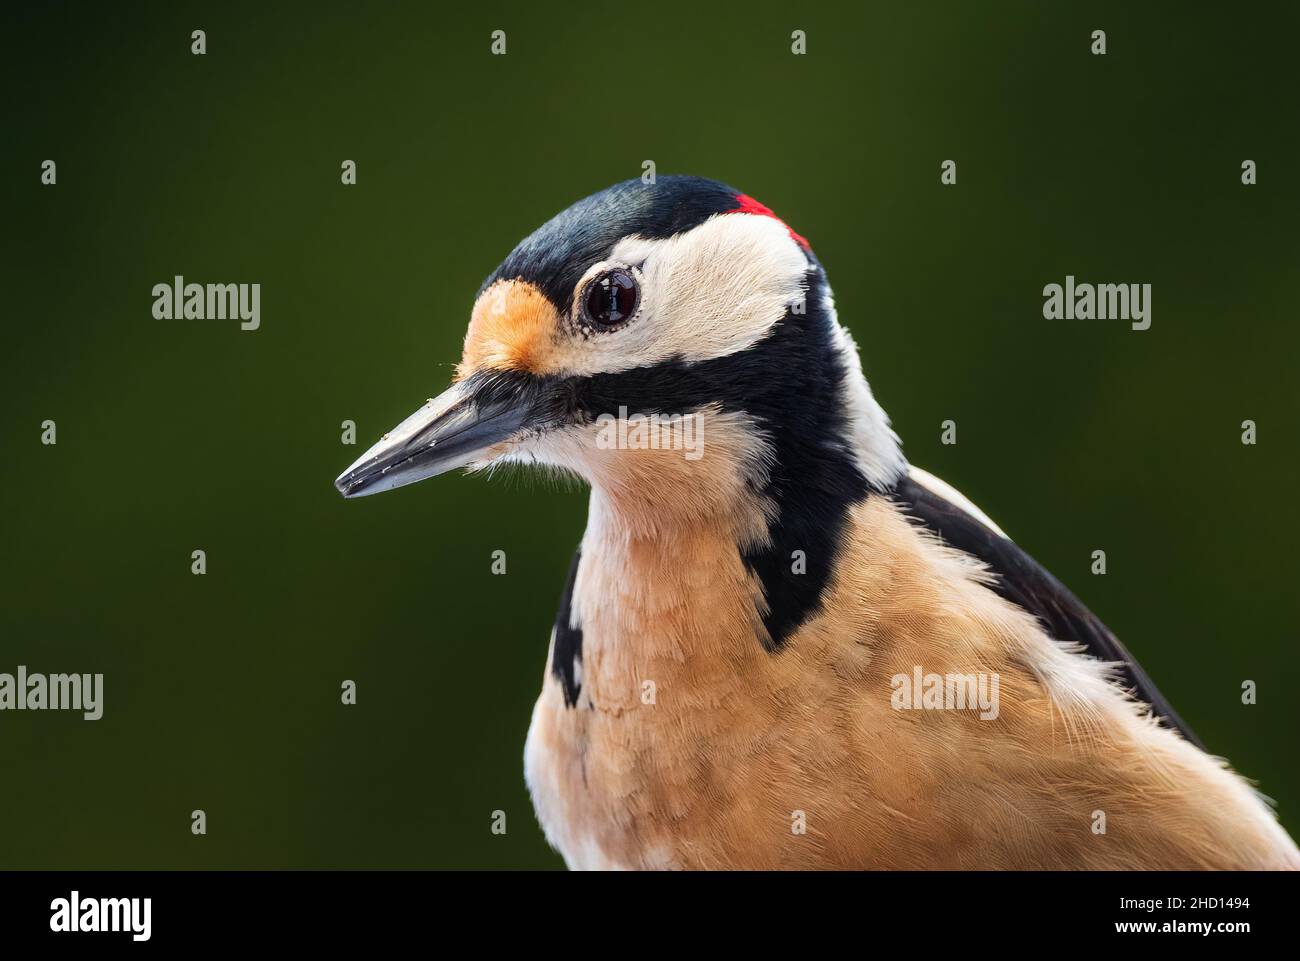 Great Spotted Woodpecker - Dendrocopos major, beautiful colored woodpecker from European forests and woodlands, Zlin, Czech Republic. Stock Photo